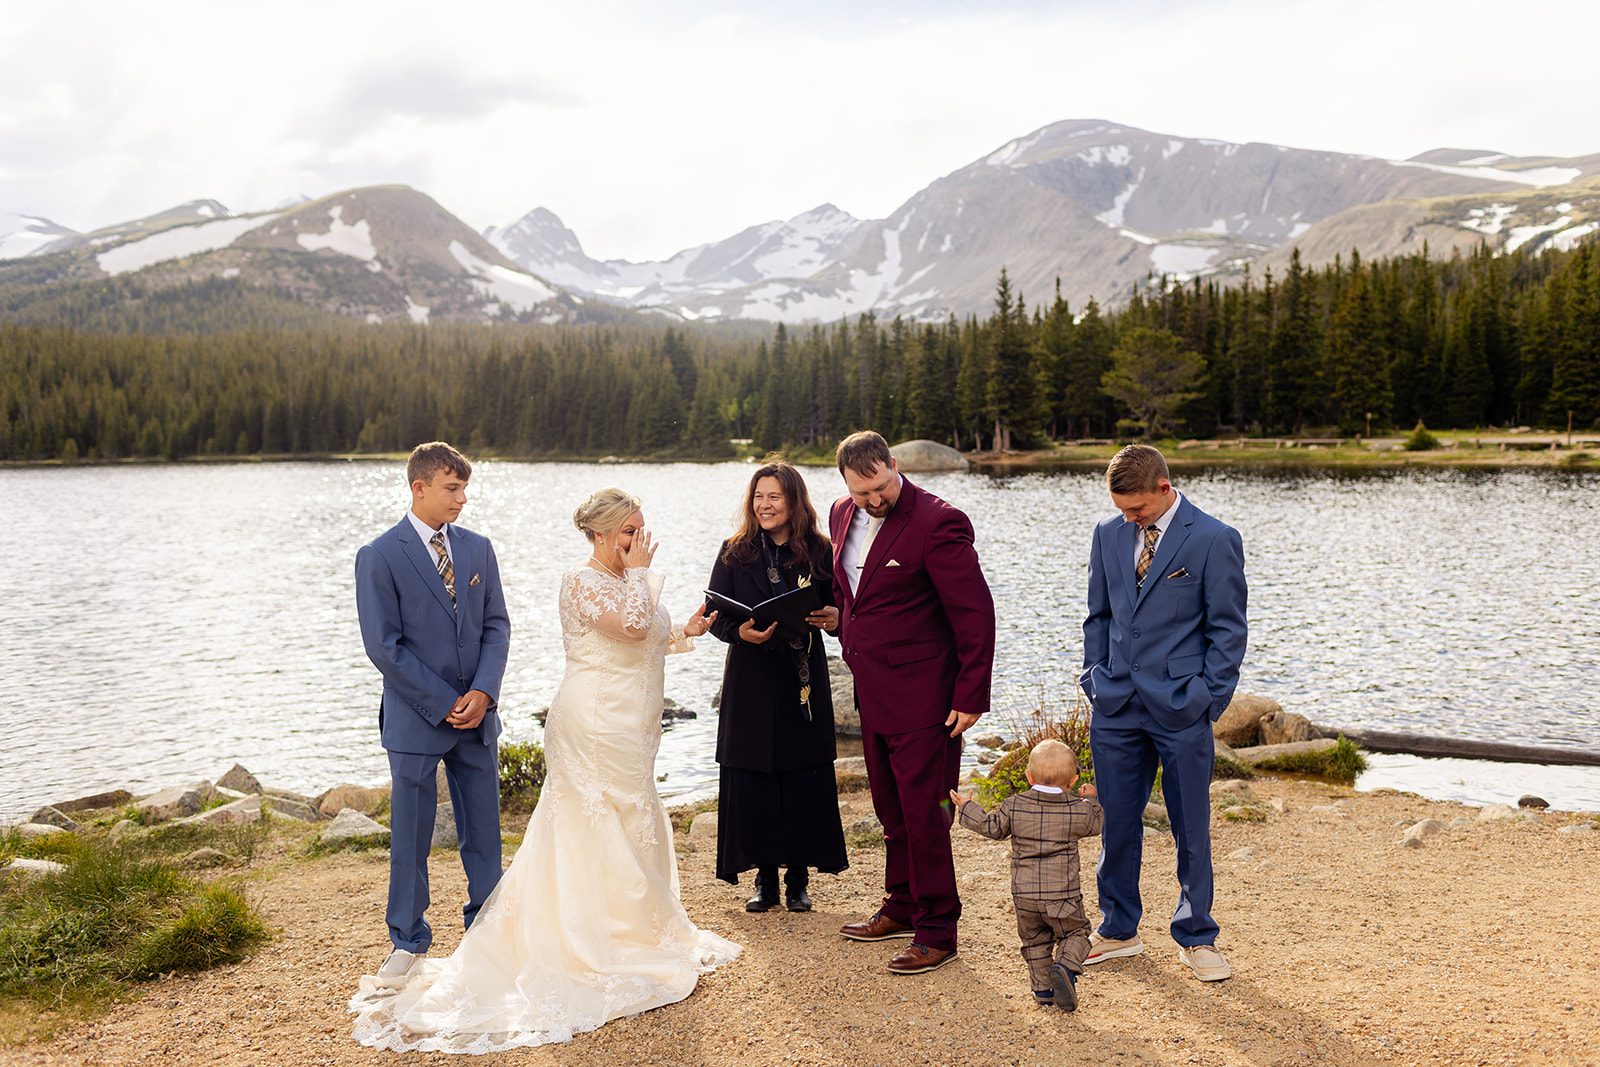 the couple with their boys and the officiant on a sunny day at brainard lake for their wedding.